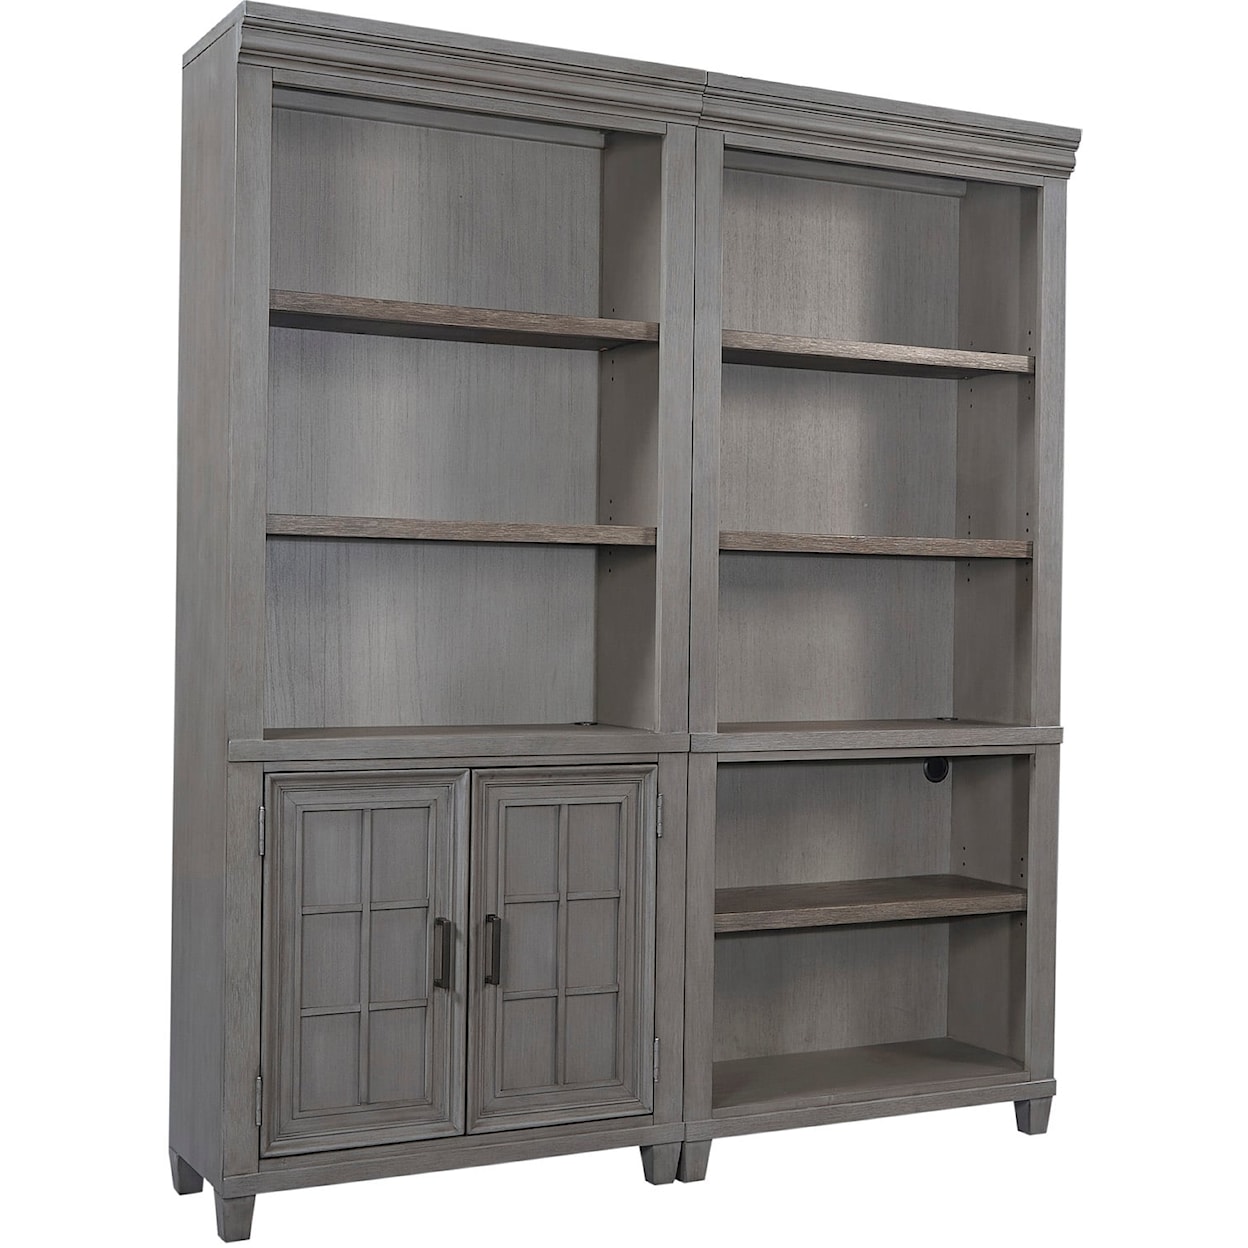 Aspenhome Eileen Bookcase with Open Storage